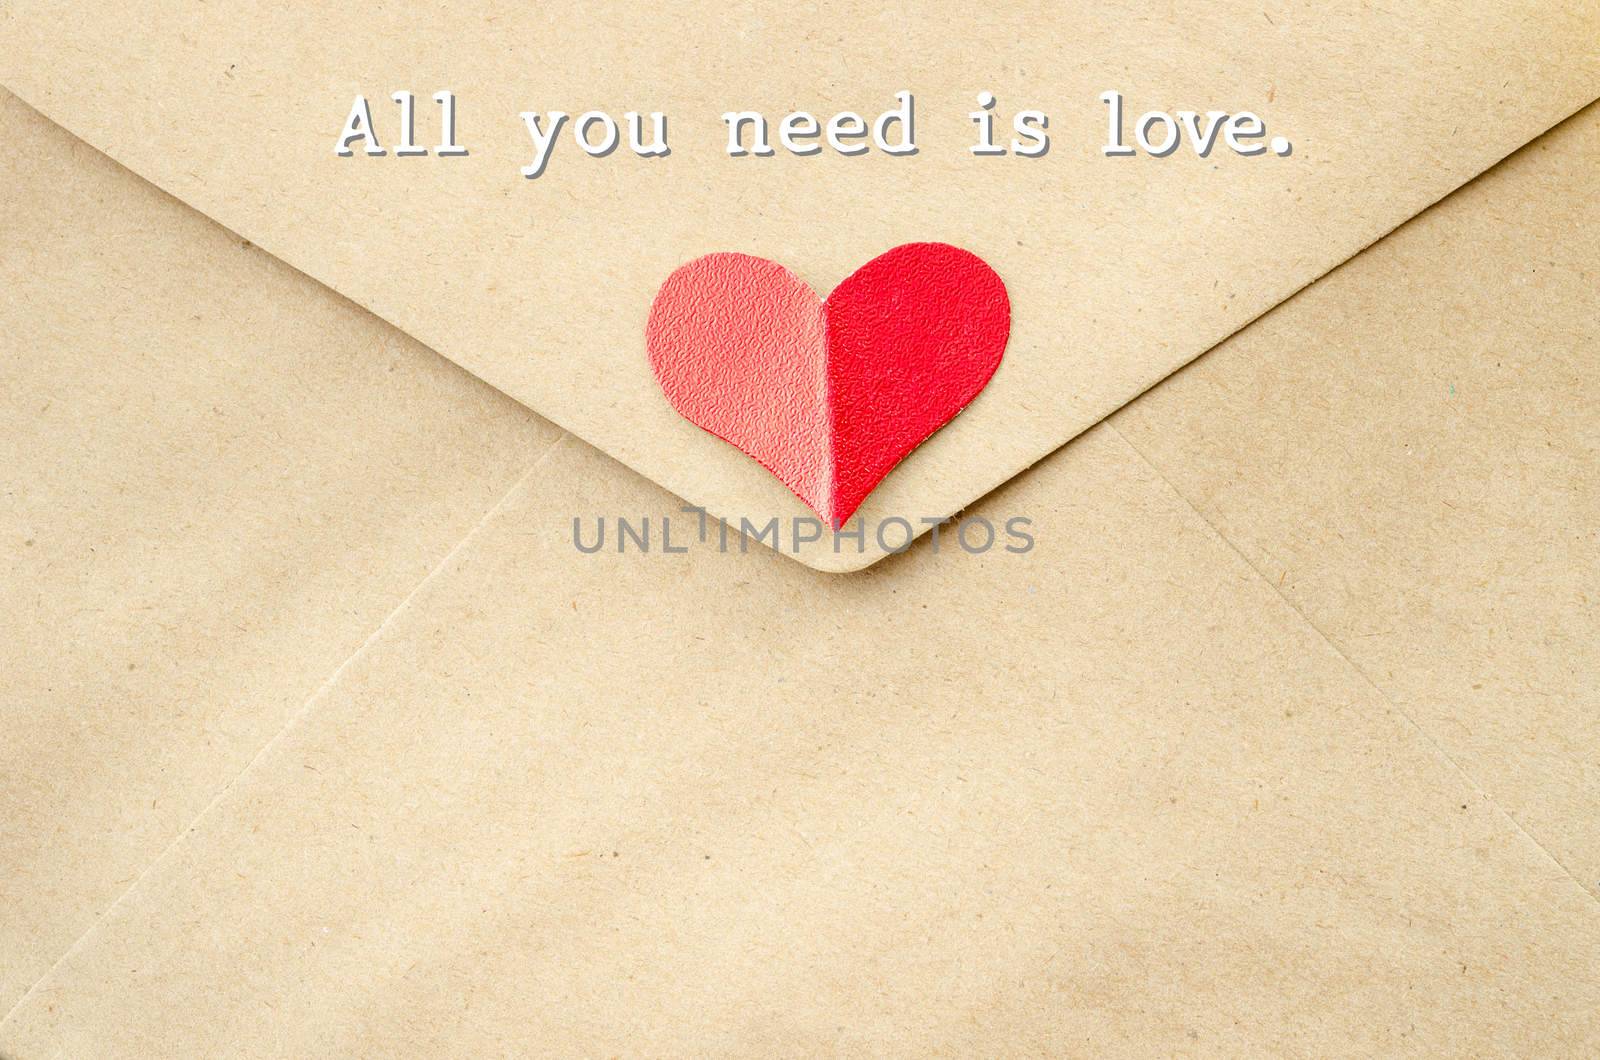 All you need is love on the love letter. by Gamjai